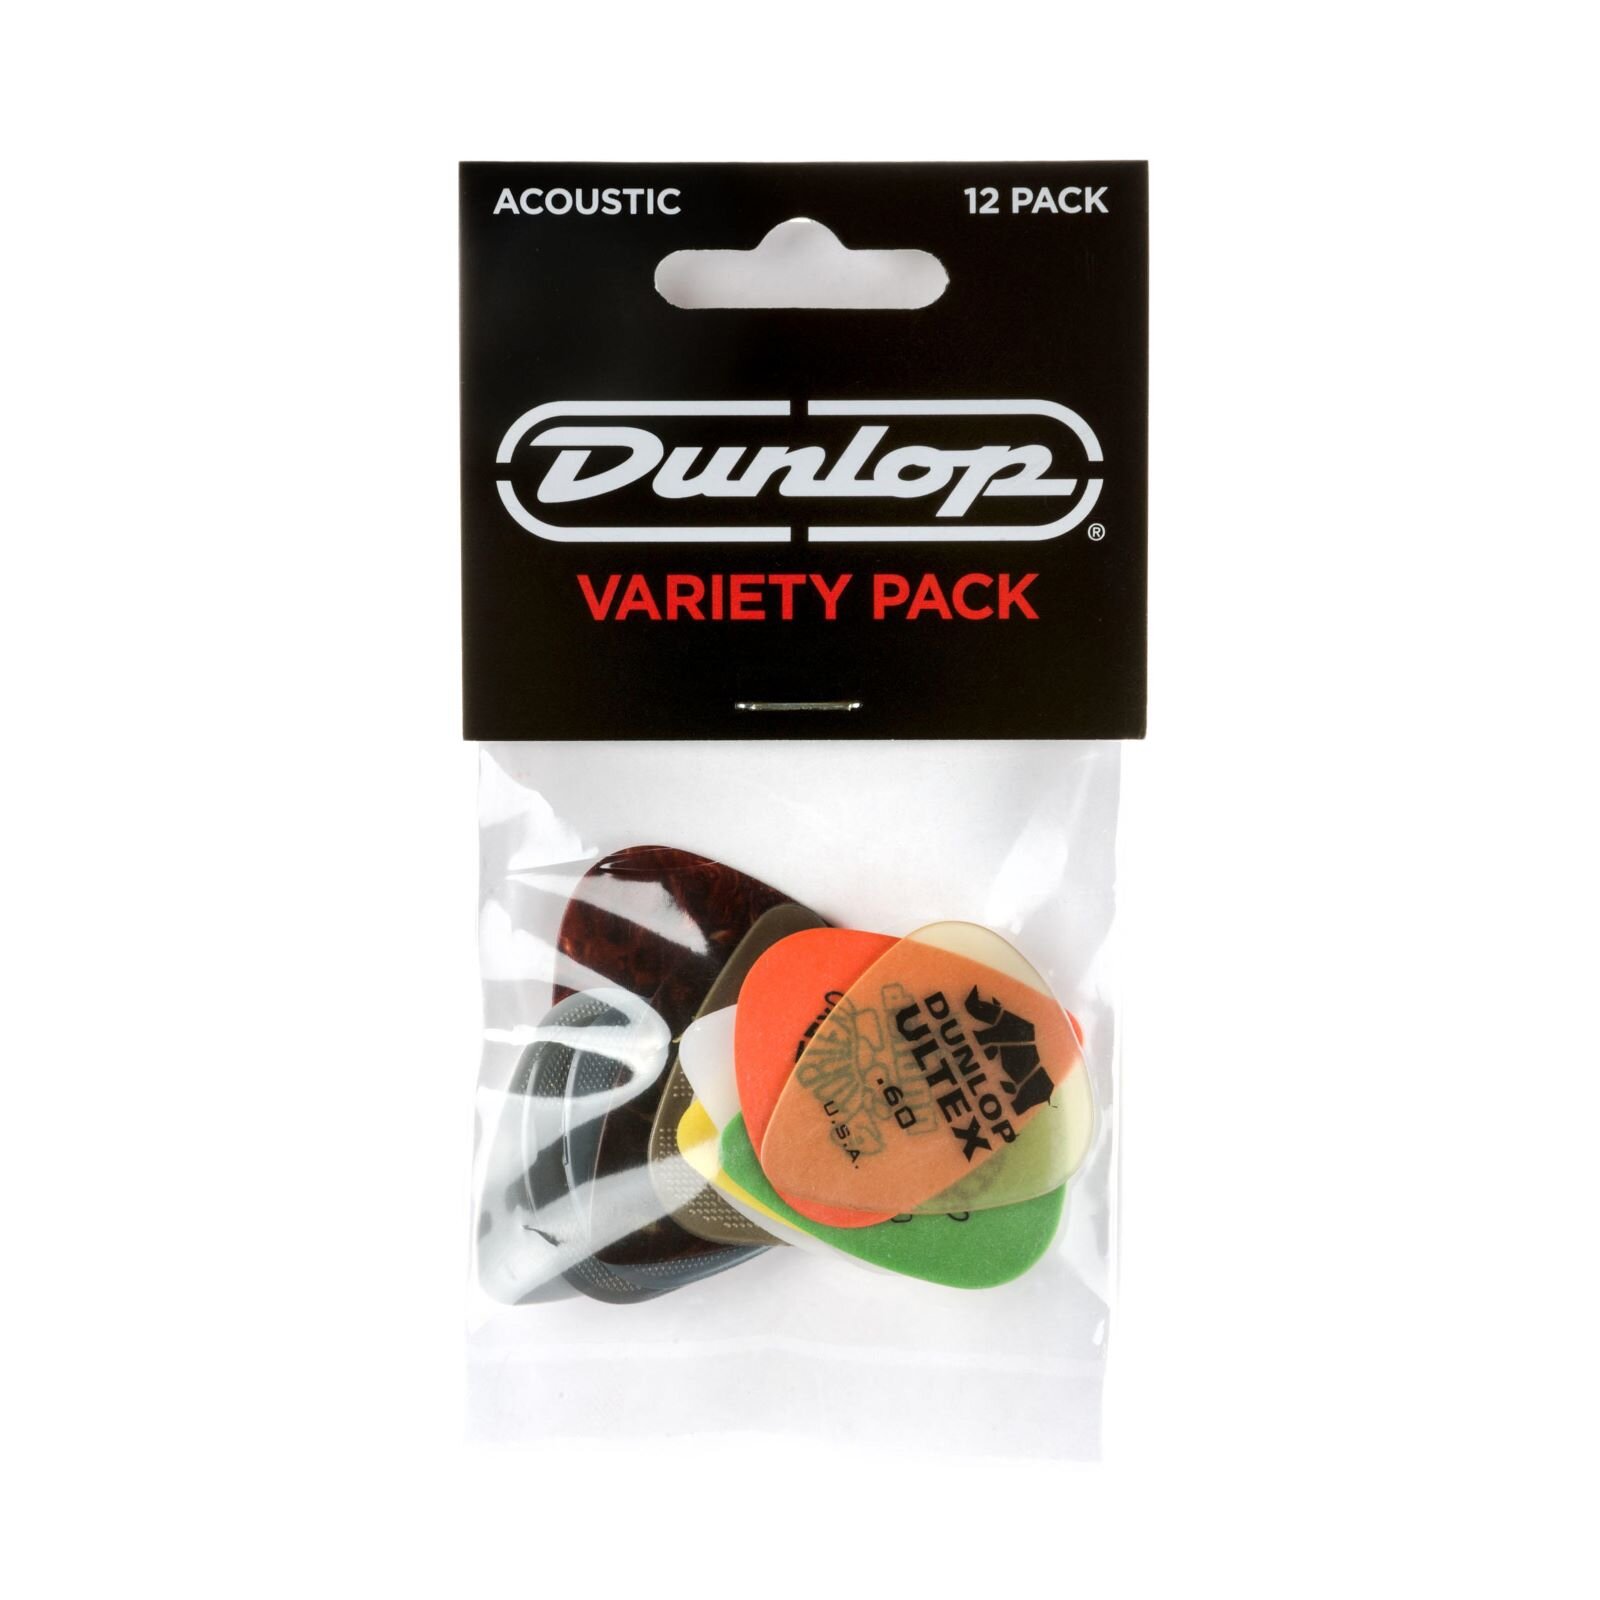 Dunlop PVP112 Acoustic Pick Variety Player